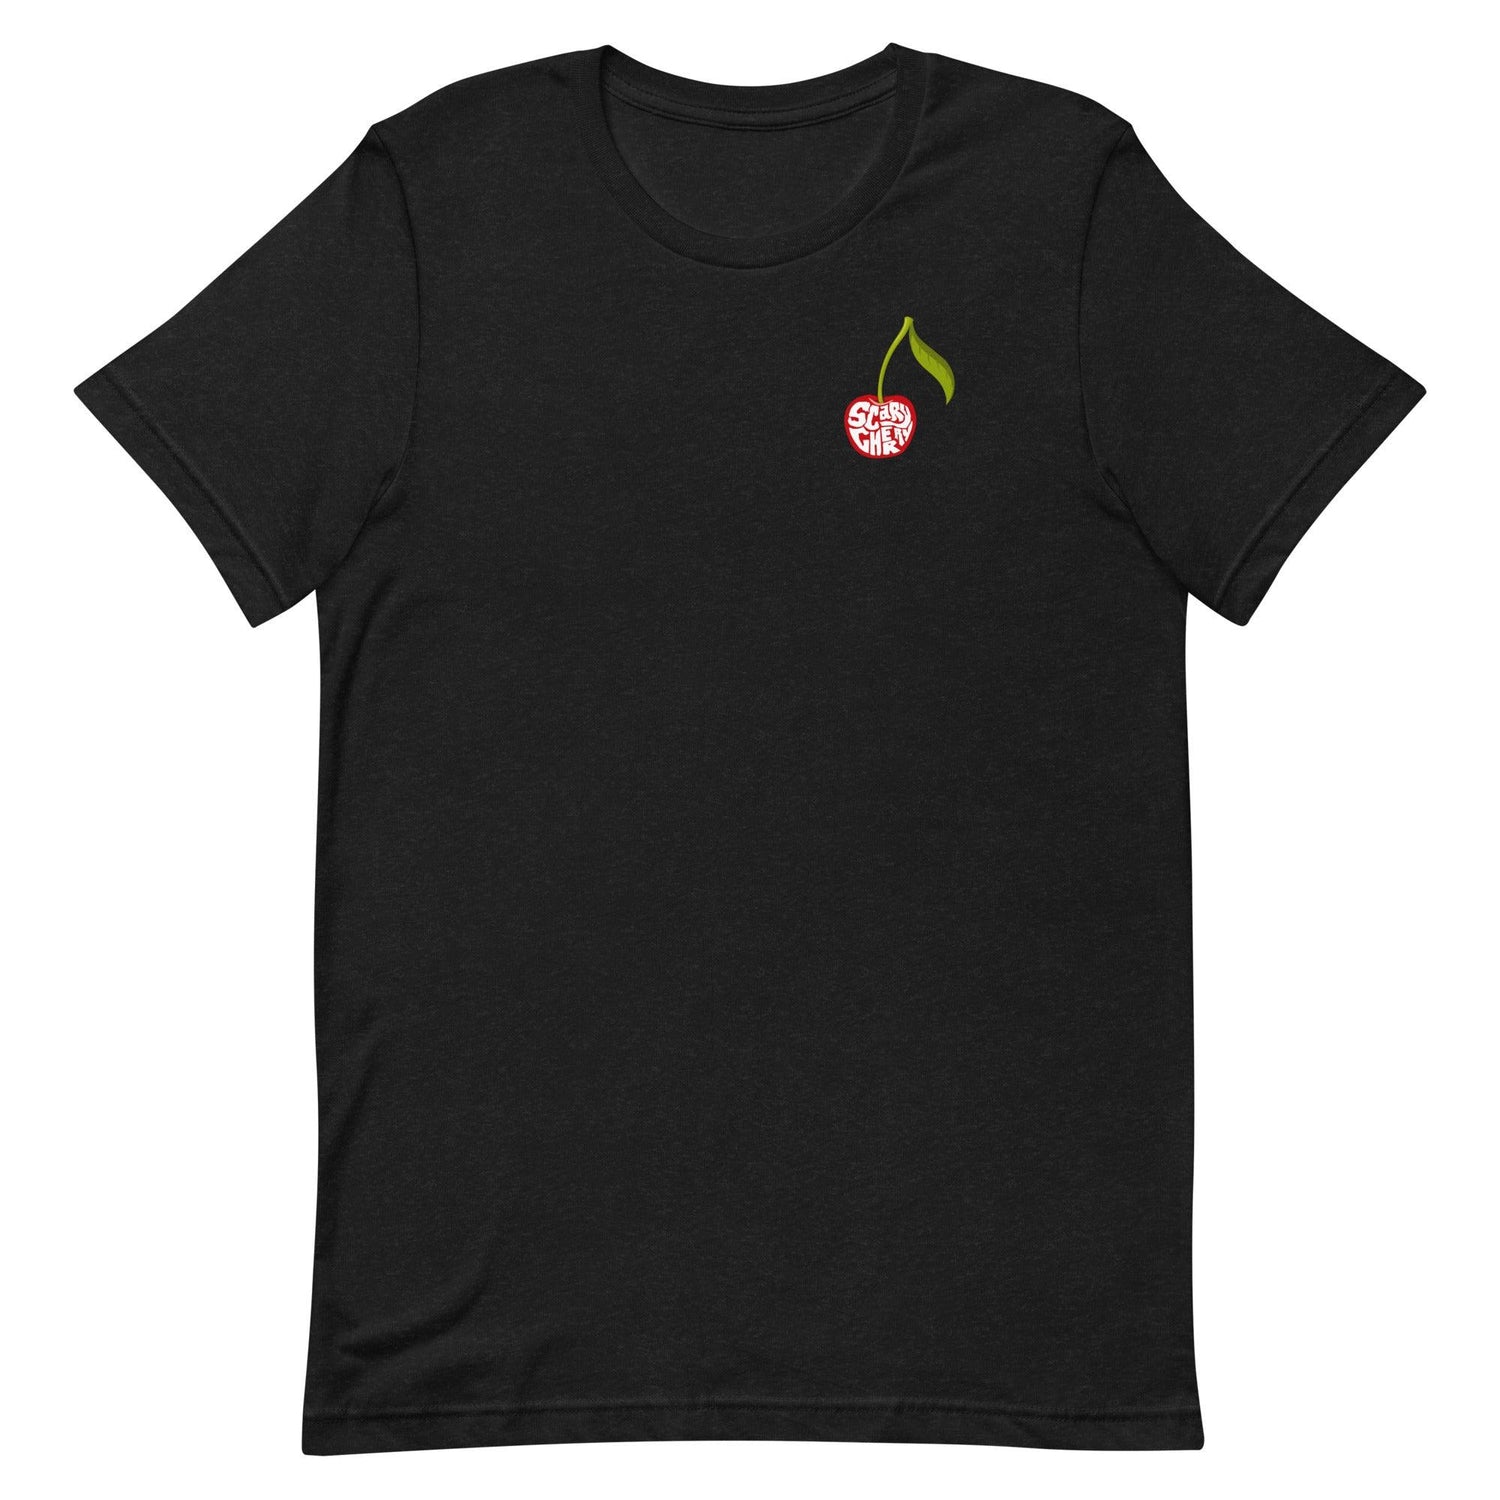 Cecil Cherry "Scary Cherry" t-shirt - Fan Arch